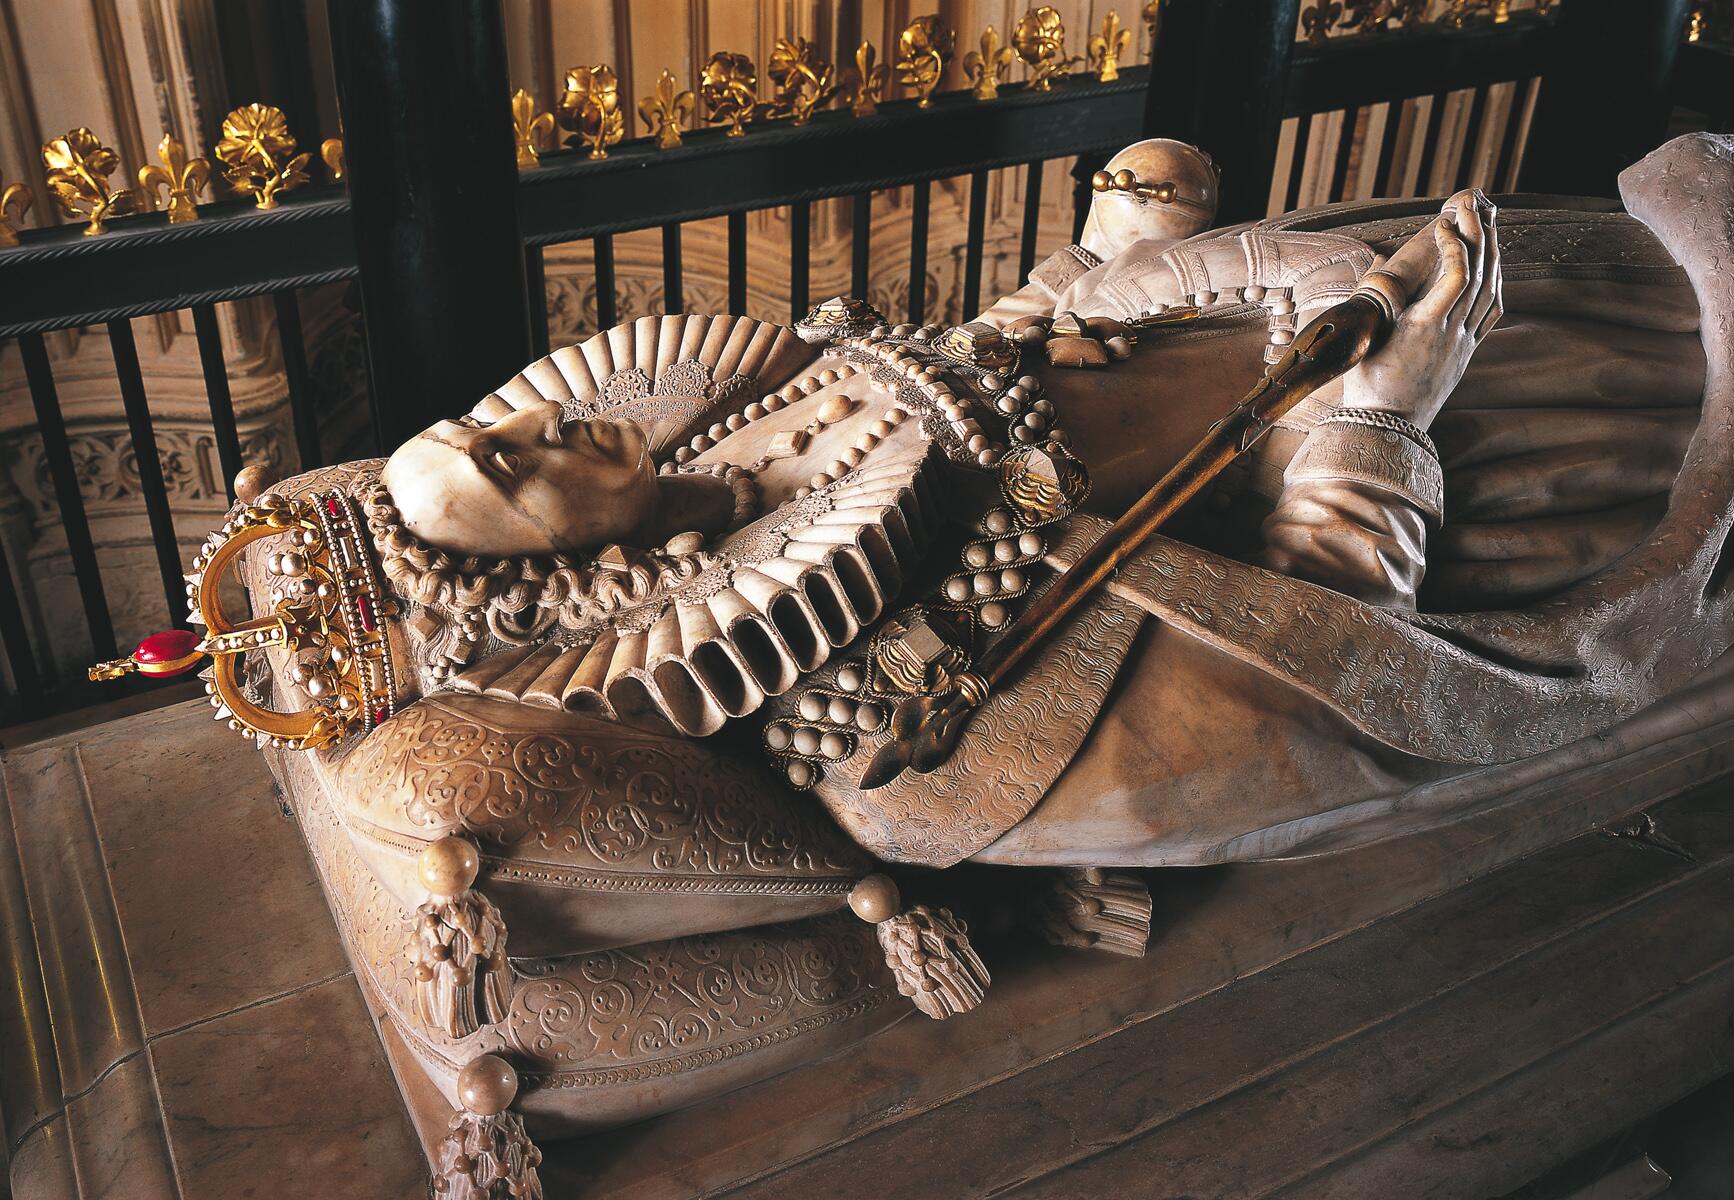 A photograph of the tomb of Elizabeth I at Westminster Abbey. The lid is a an elaborate stone sculpture of the queen in full royal garb lying on top of pillows.